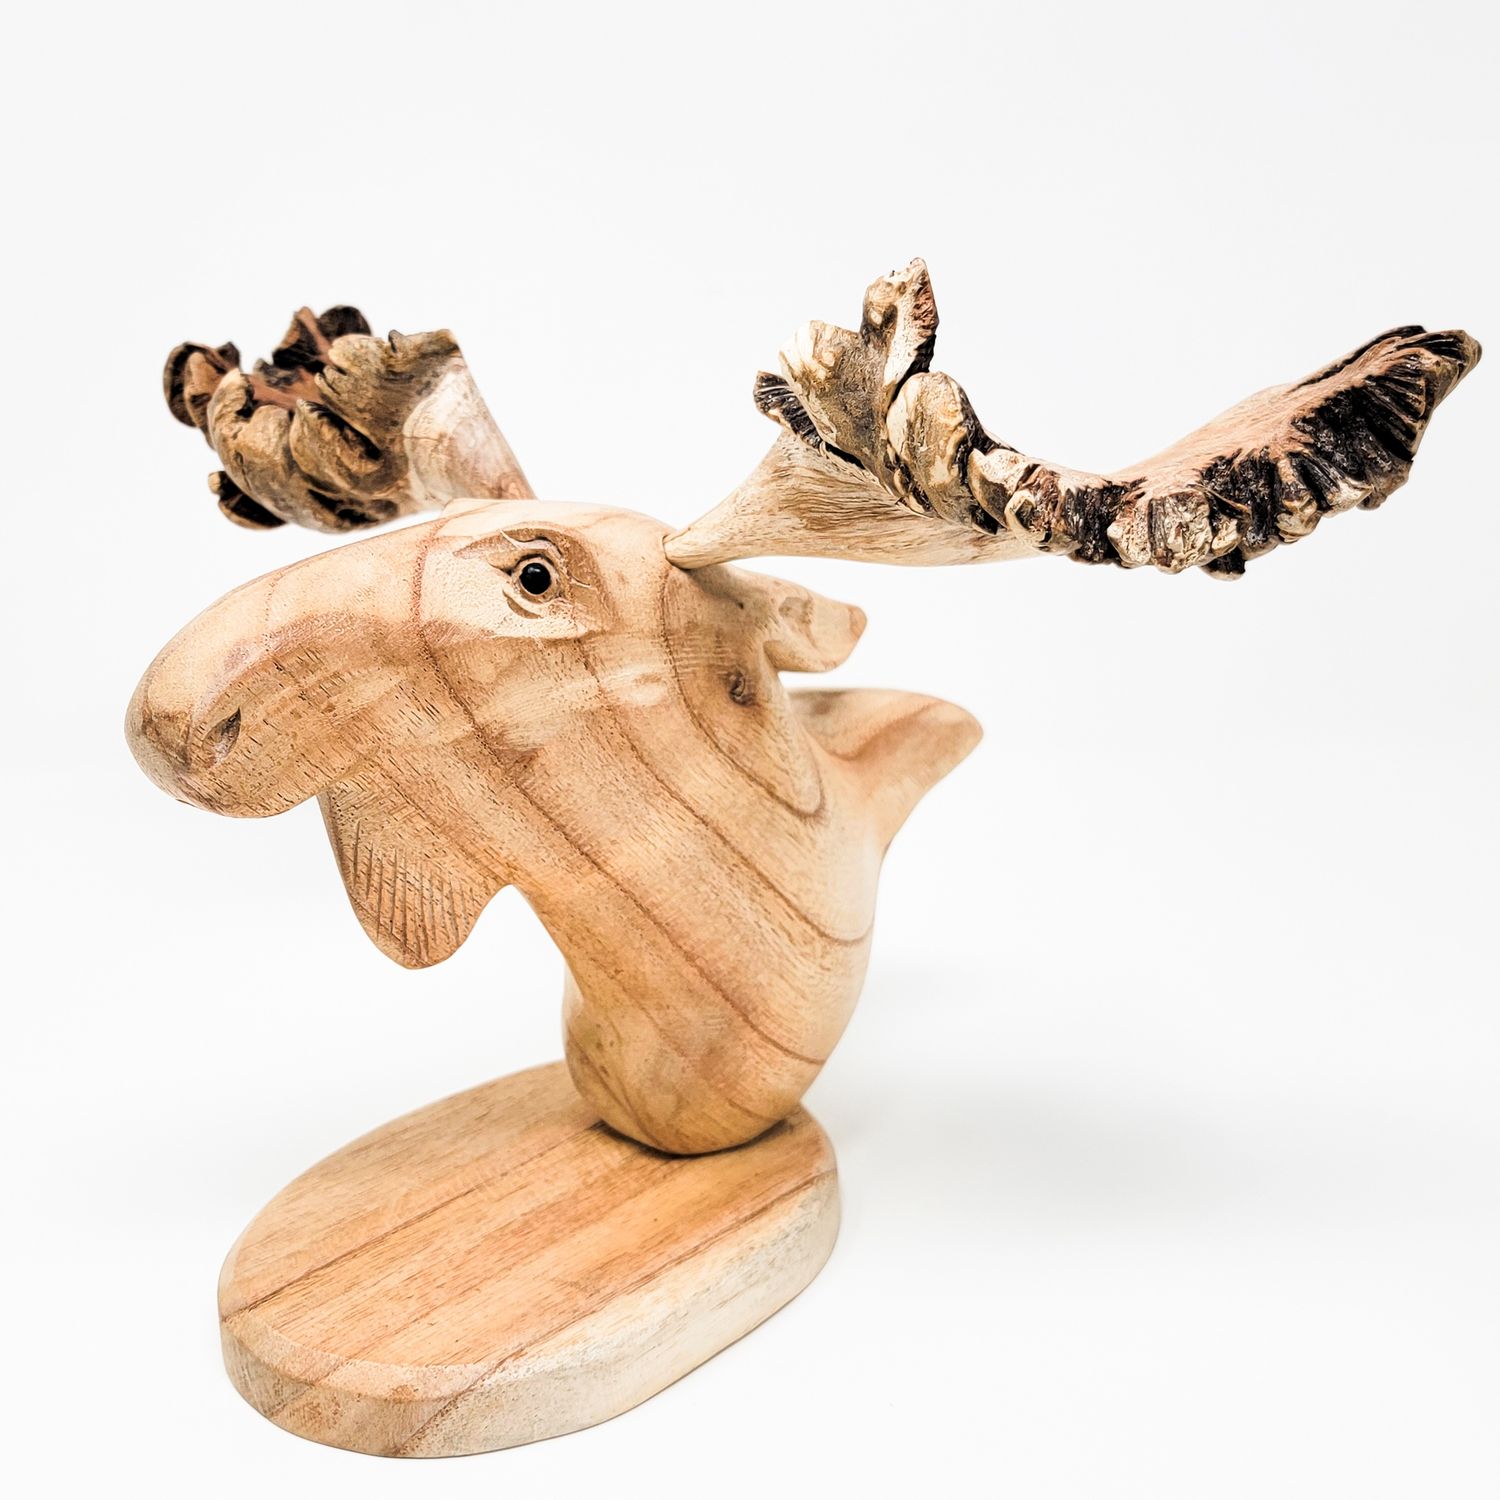 MOOSE HEAD BUST HAND MADE WITH SUAR HARDWOOD ON STAND OR PLAQUE 1839, Item #: 1839, Alternate Lookup: BSS8-503, Vendor Stock #: TIN 32 859 10in 25cm